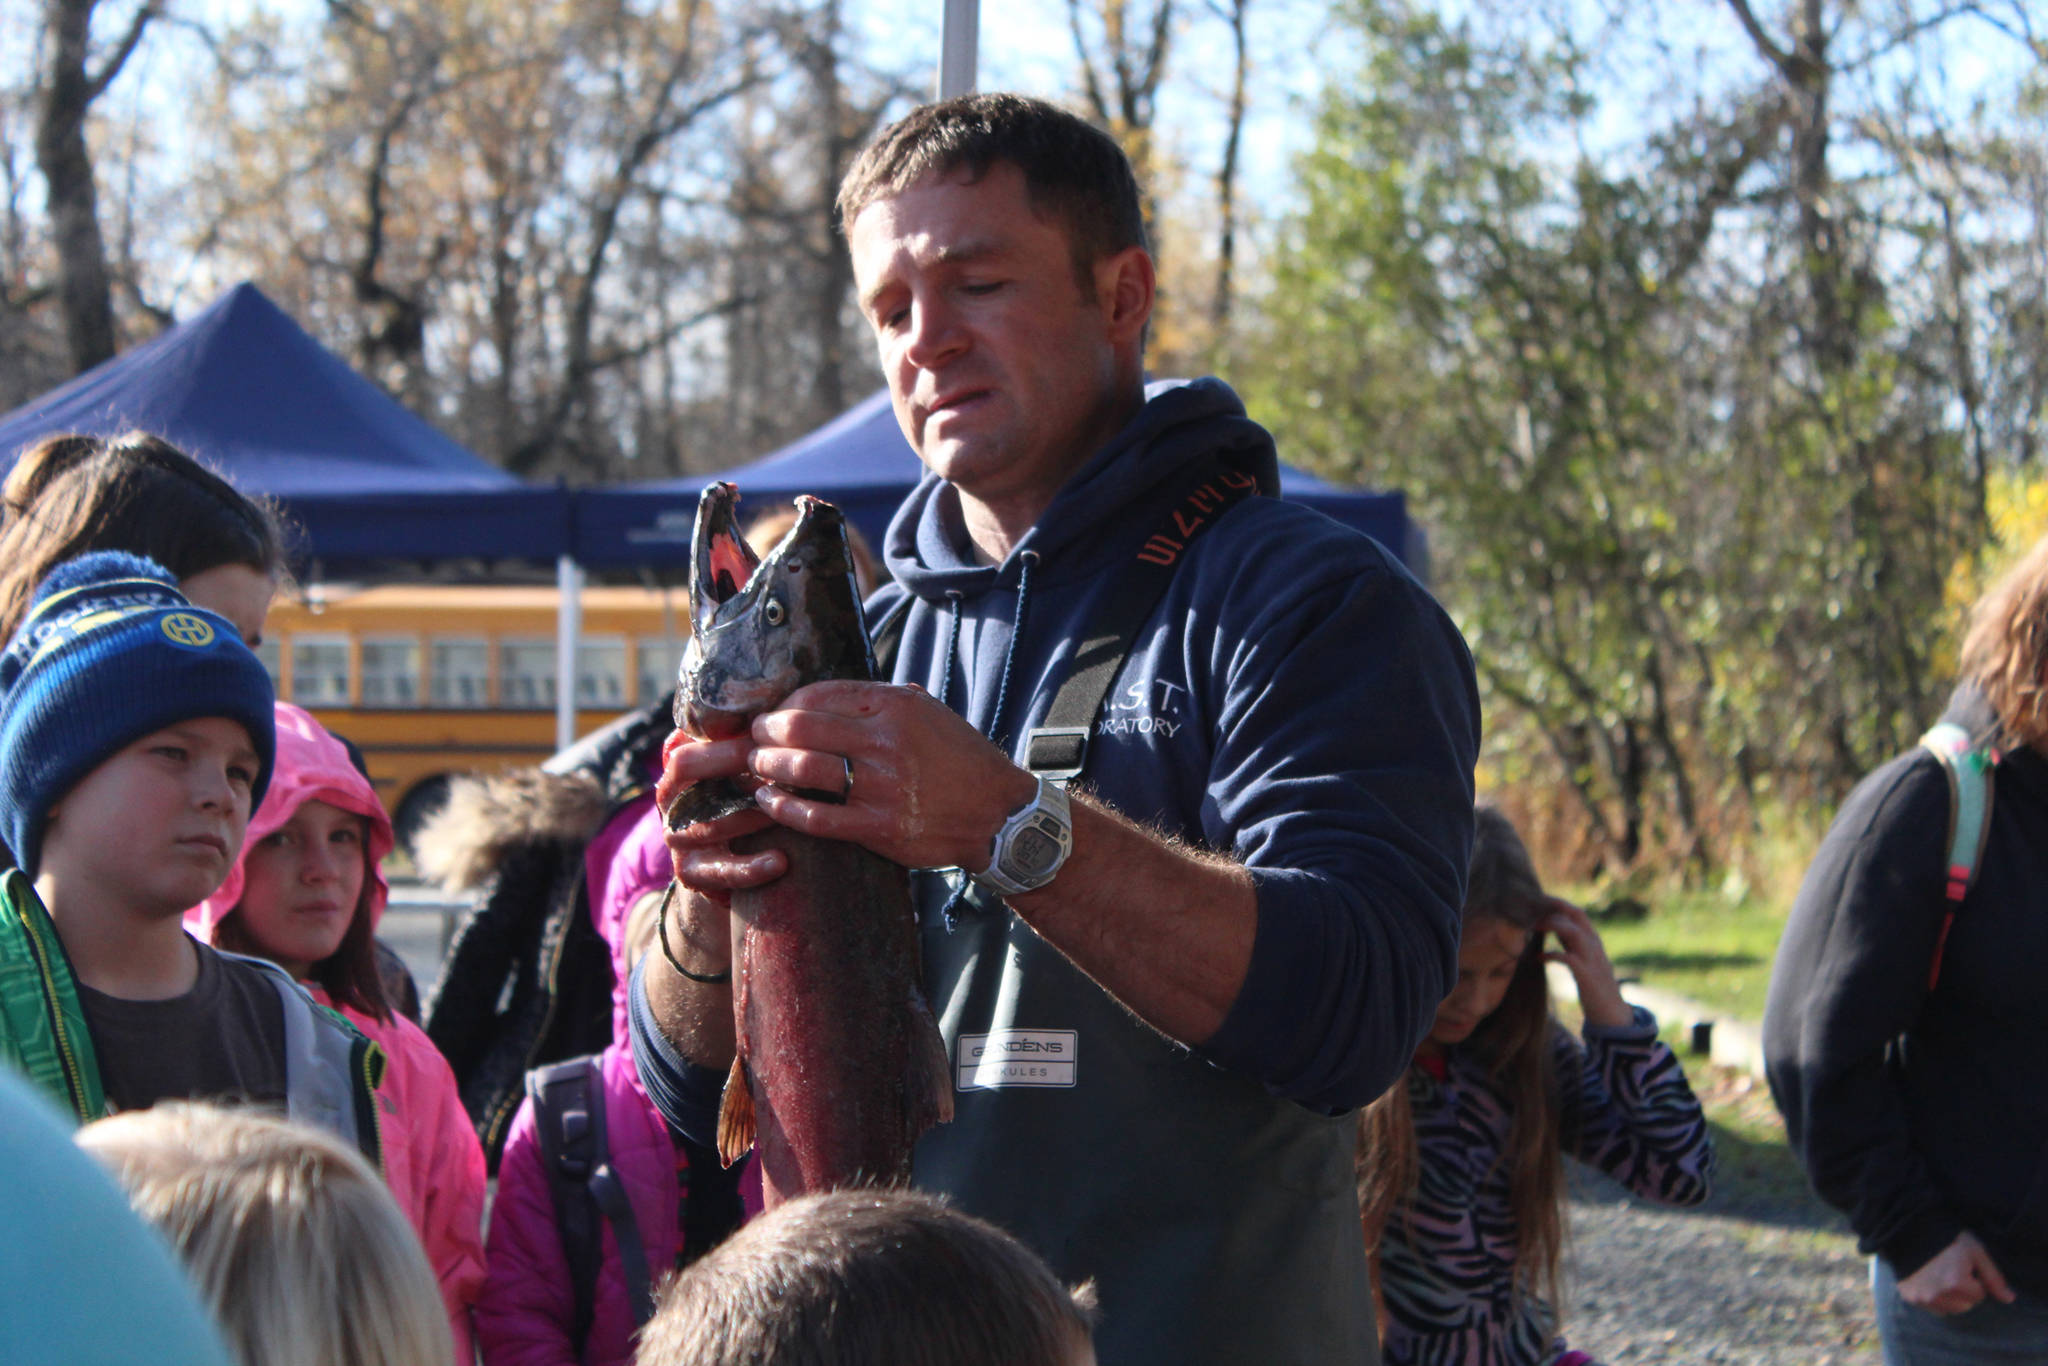 Tim Blackman with the Alaska Department of Fish and Game shows students from lower Kenai Peninsula schools the different parts of a coho salmon’s anatomy during an egg take event Thursday, Oct. 5, 2017 at the Anchor River in Anchor Point, Alaska. The egg take is the first event that kicks off the year-long Salmon in the Classroom program, in which students learn about the salmon life cycle while taking care of salmon fry. (Photo by Megan Pacer/Homer News)